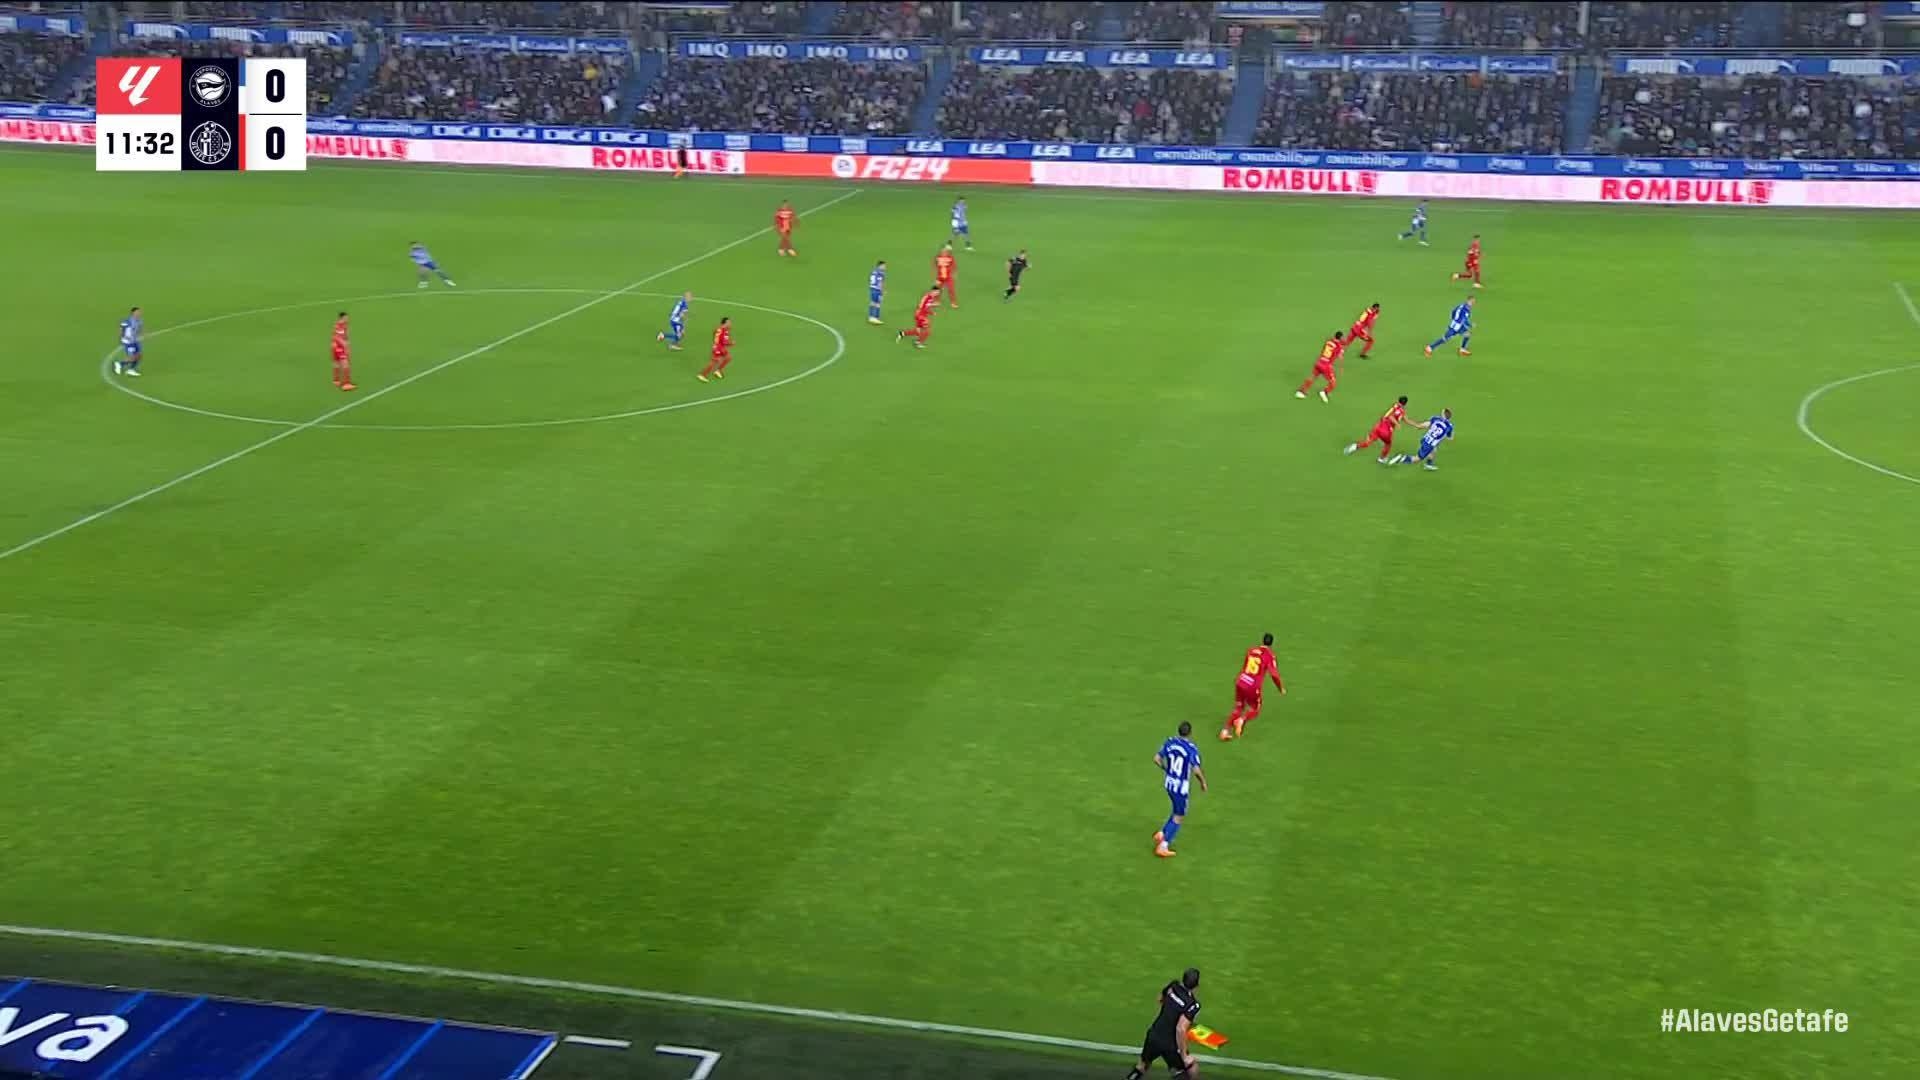 Carlos Vicente slots in the goal for Alavés